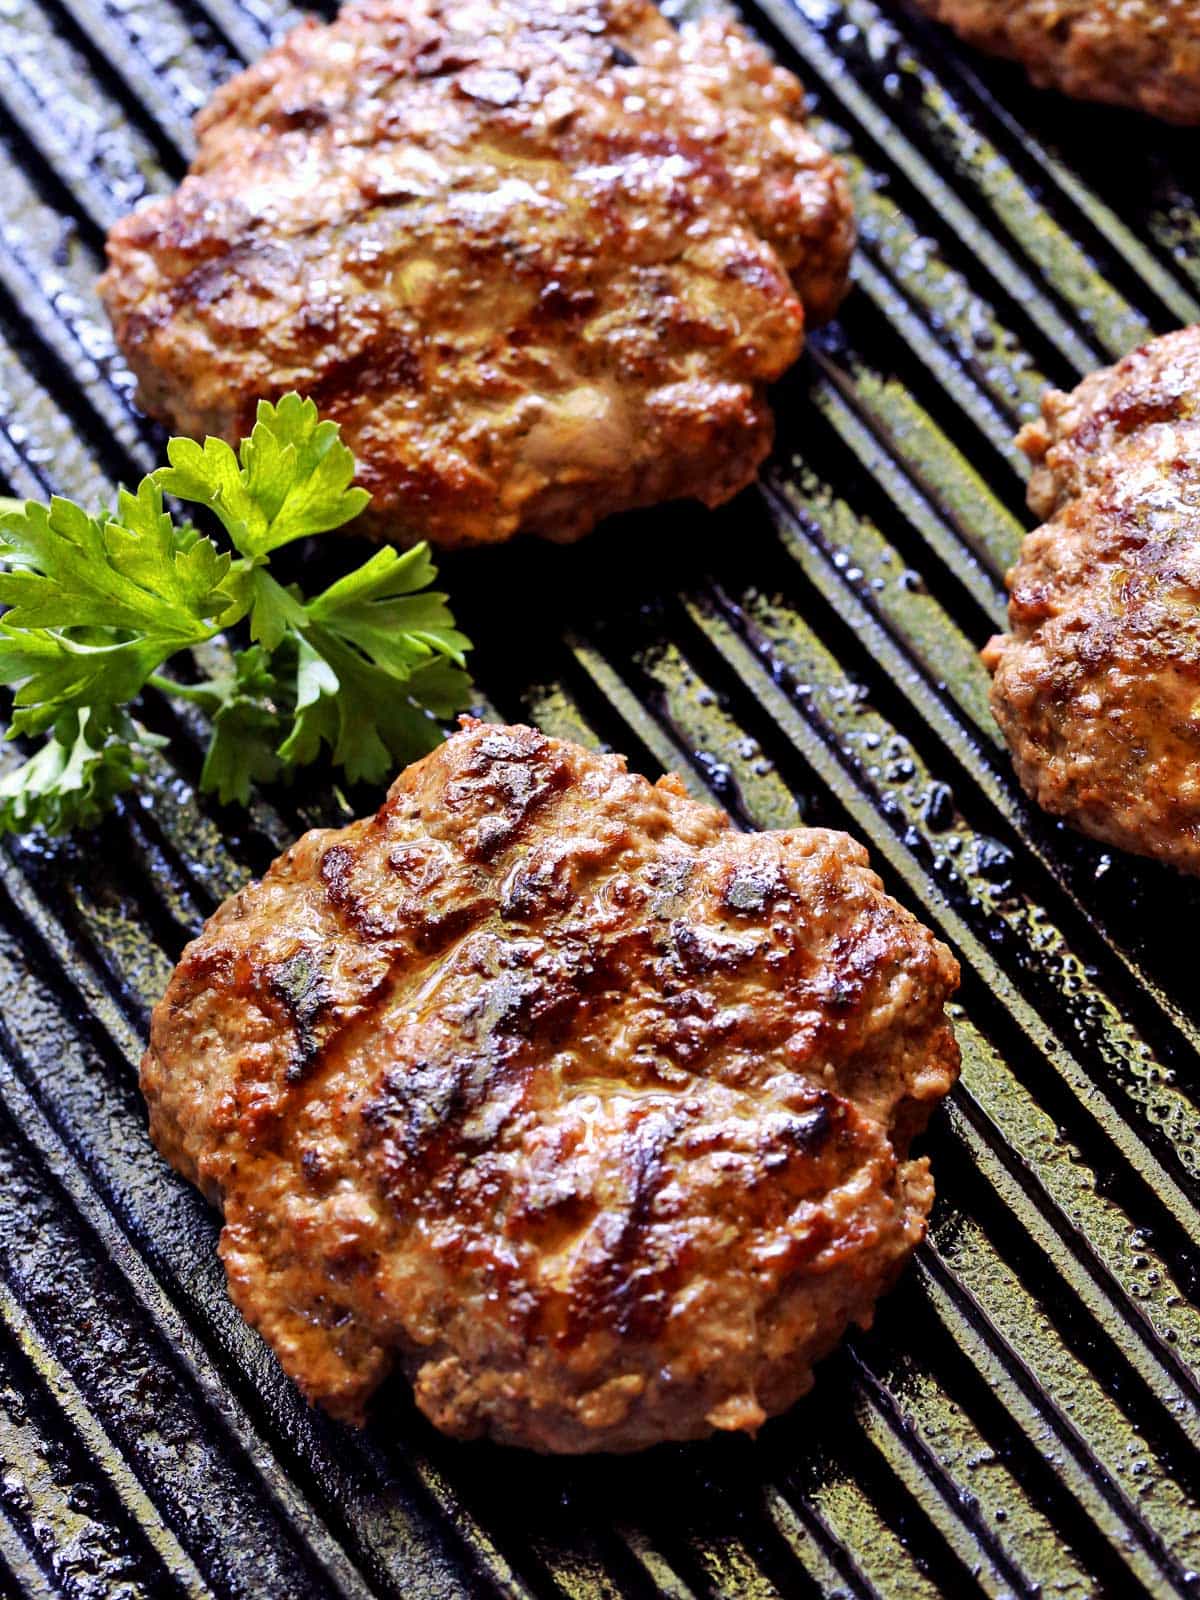 Grilled hamburgers on the grill. 